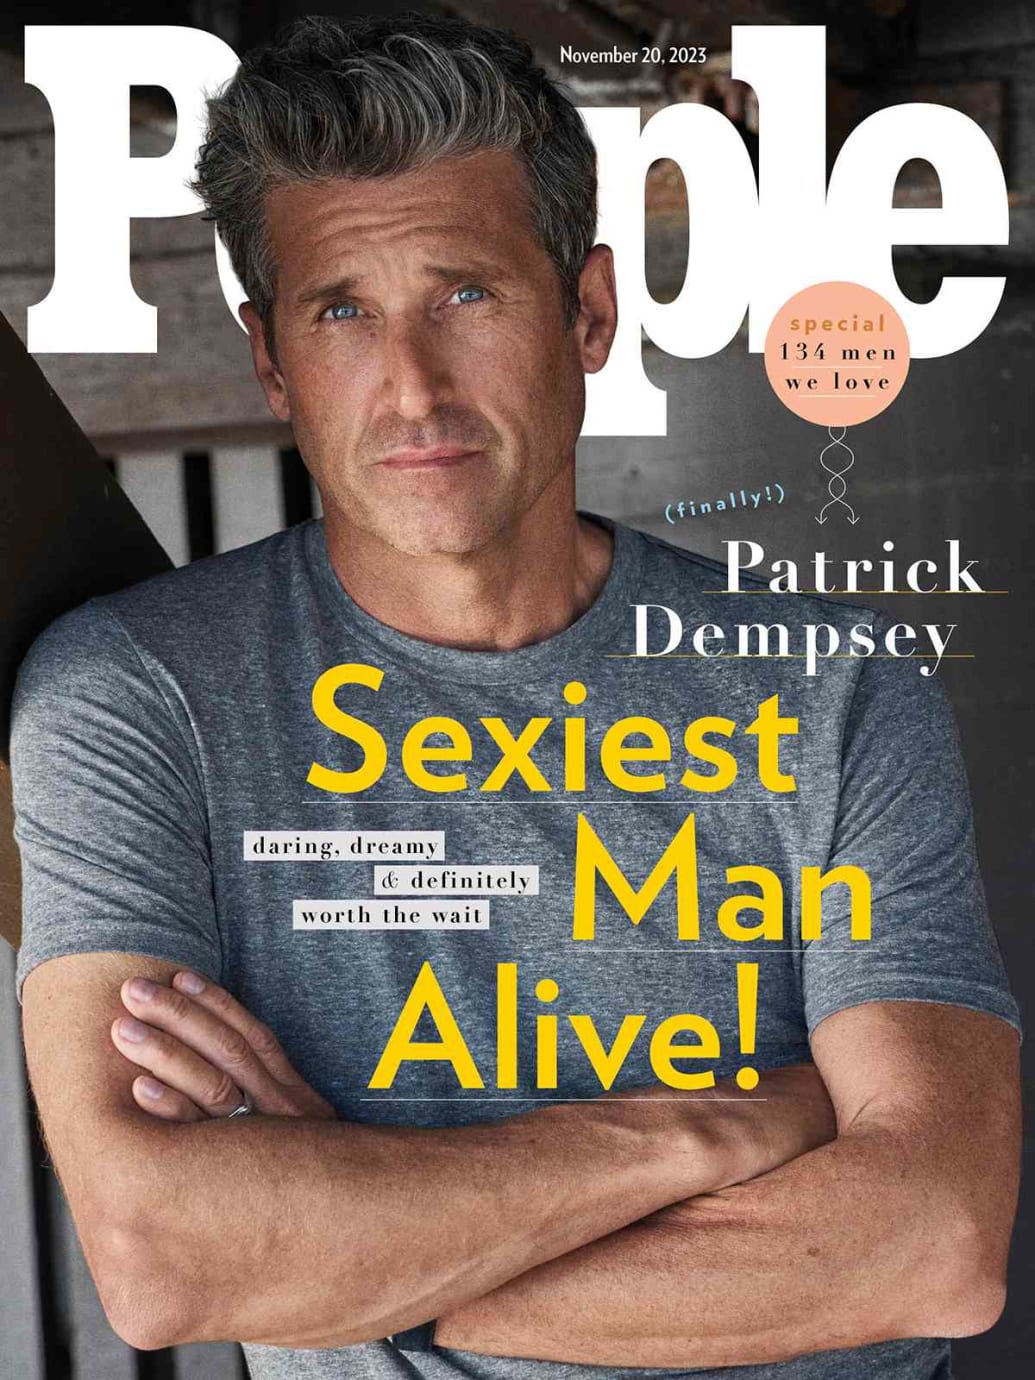 People Magazine cover featuring Patrick Dempsey with Headline "Sexiest Man Alive"